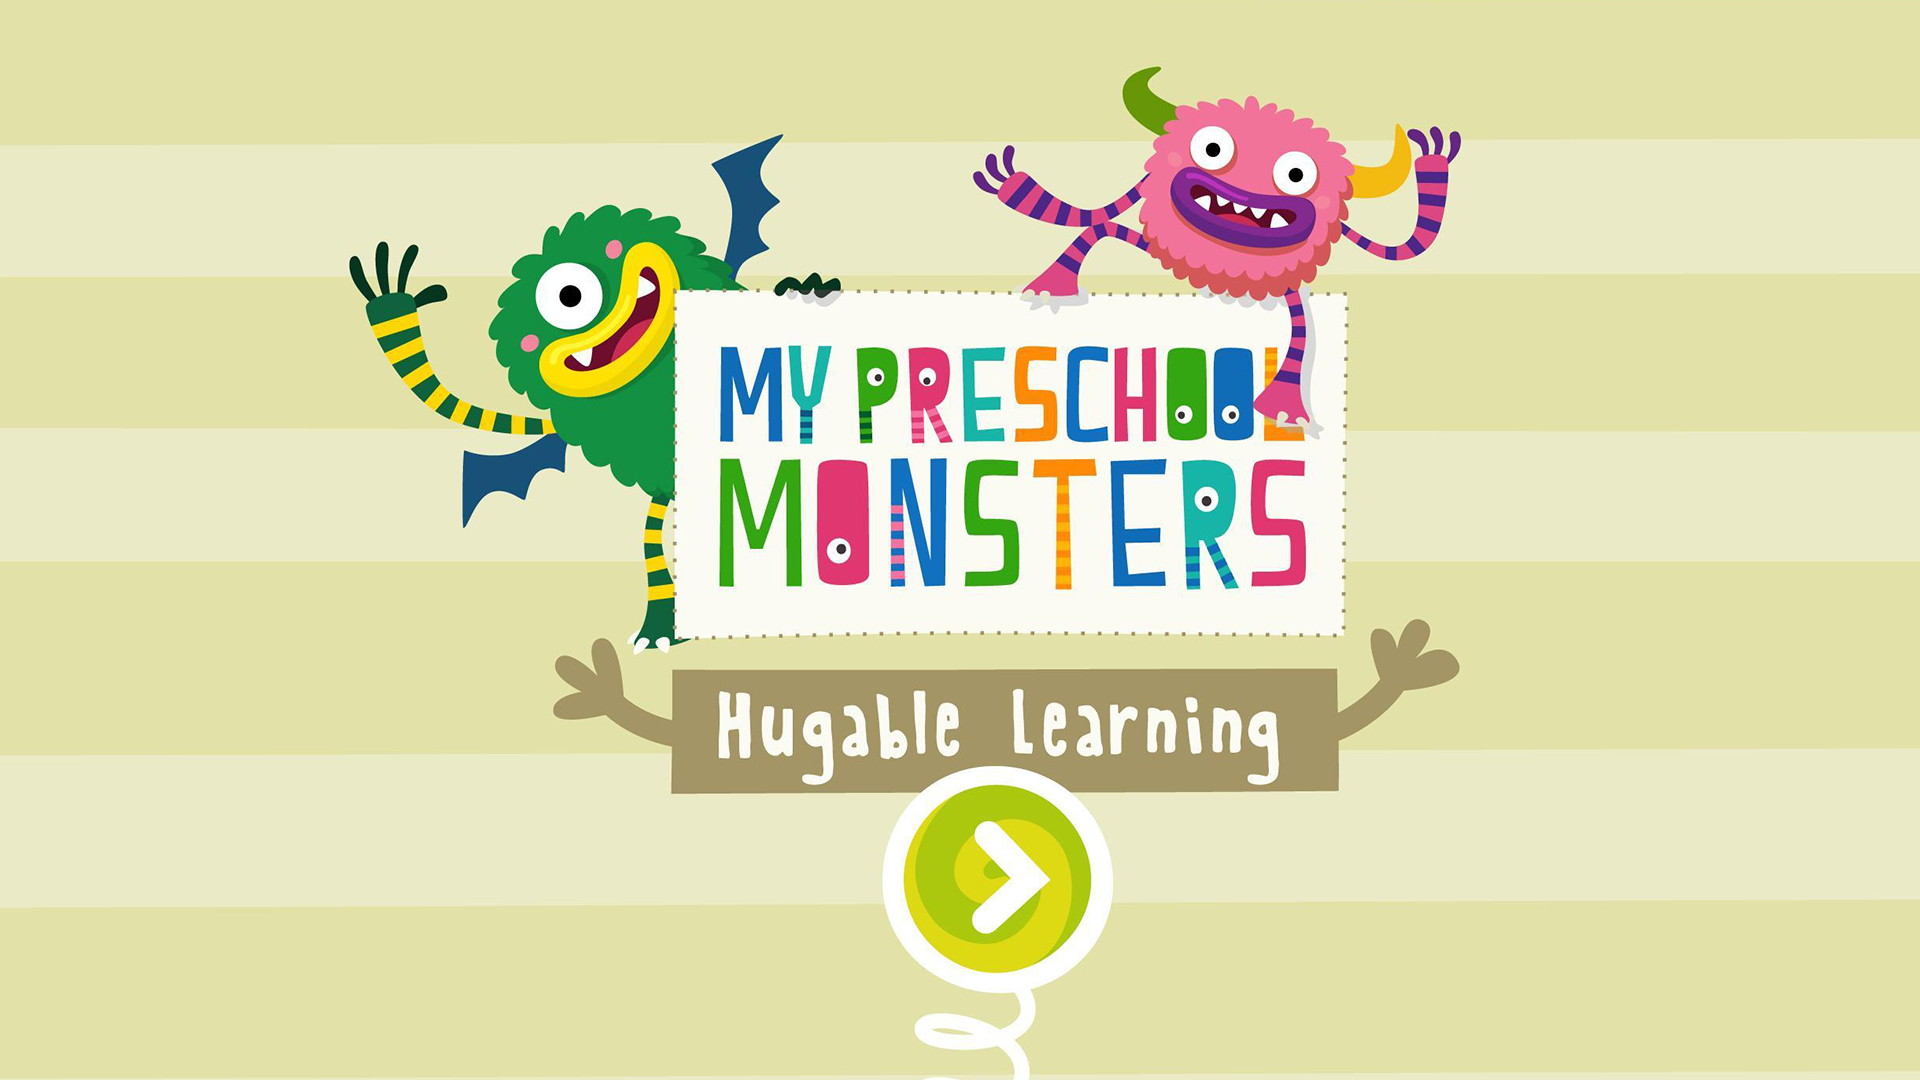 my preschool monsters galery. Antaruxa has worked on this animation project